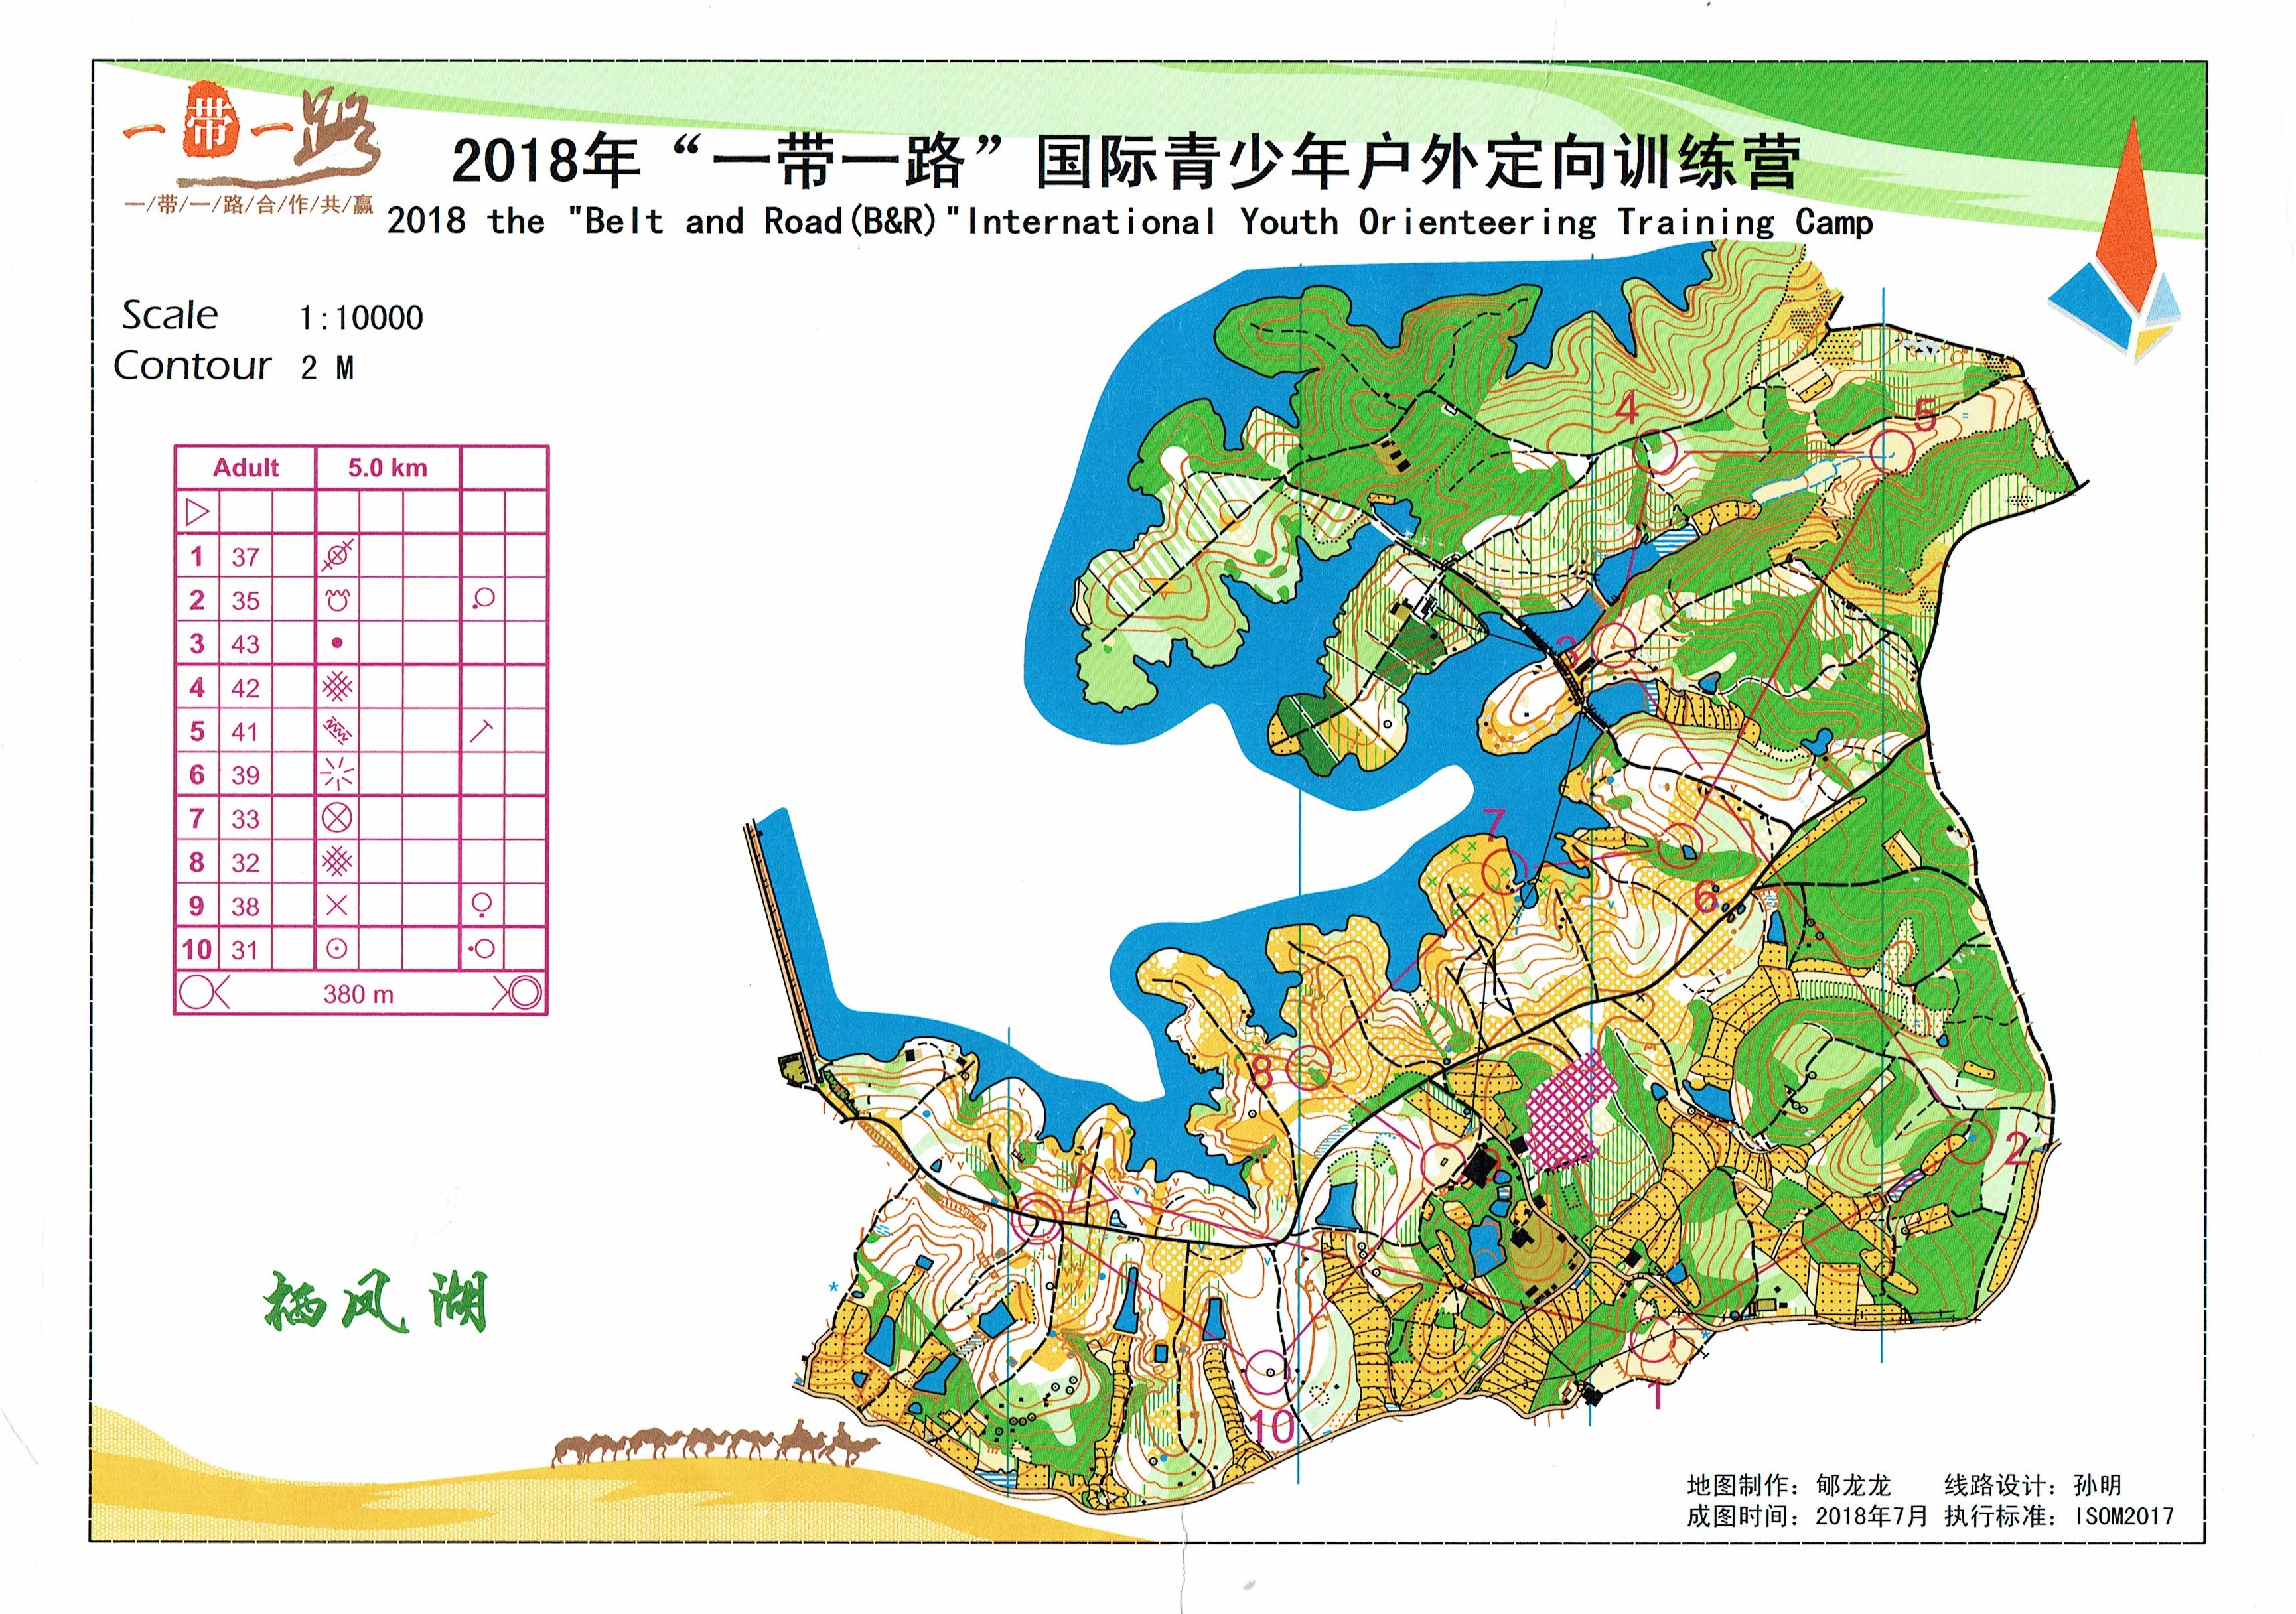 Belt and Road International Youth Orienteering Camp (26.10.2018)